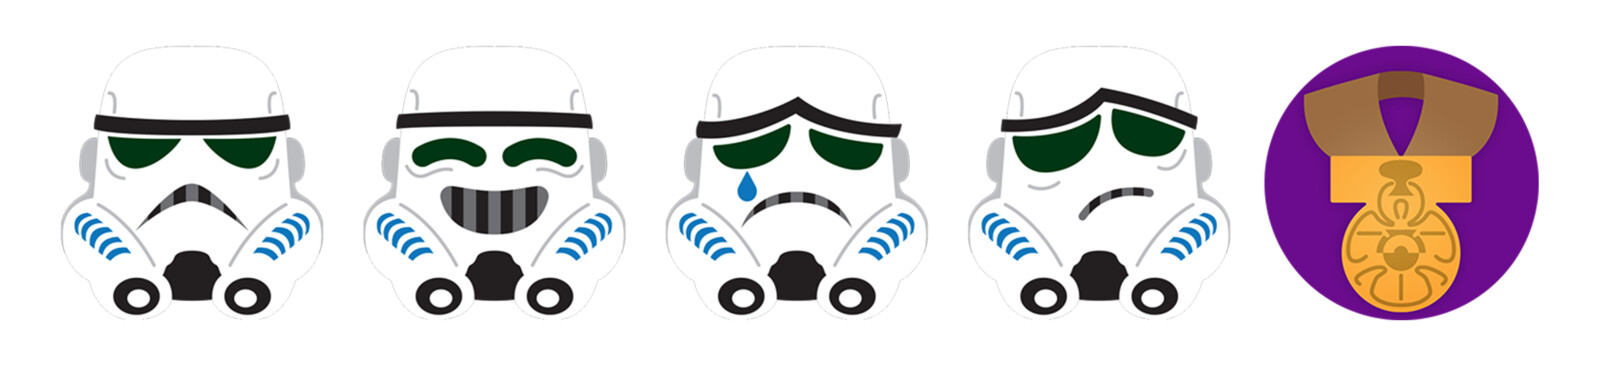 Star Wars reaction emoji - Neutral, Happy, Sad, Confused and Thanks!